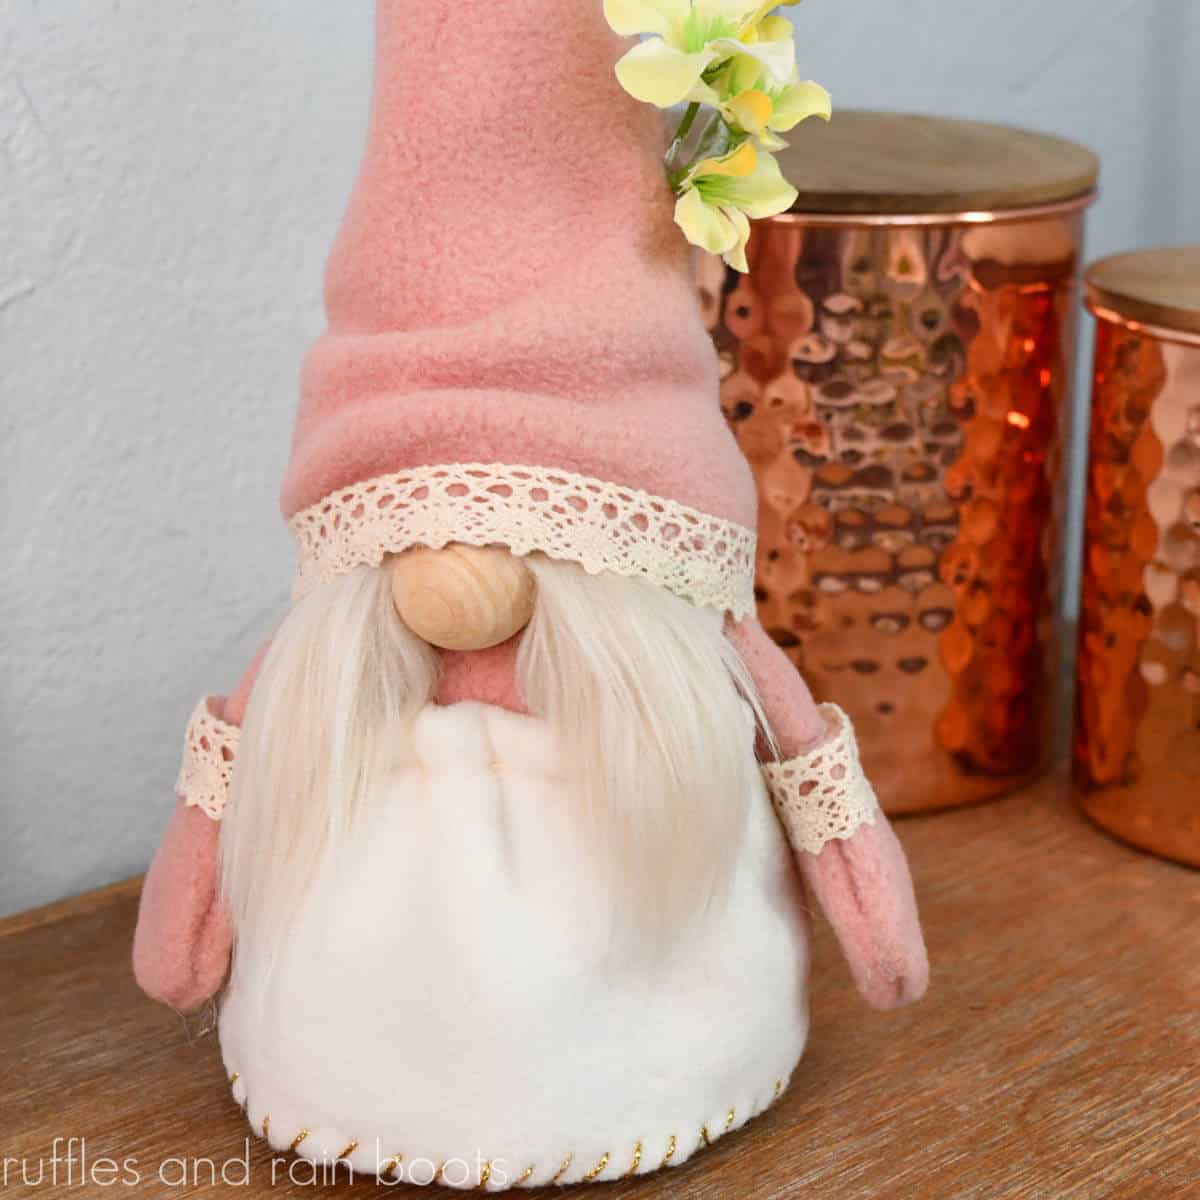 Square close up image of a girl gnome in a dress with lace and floral accents in front of copper tins on a wood table.